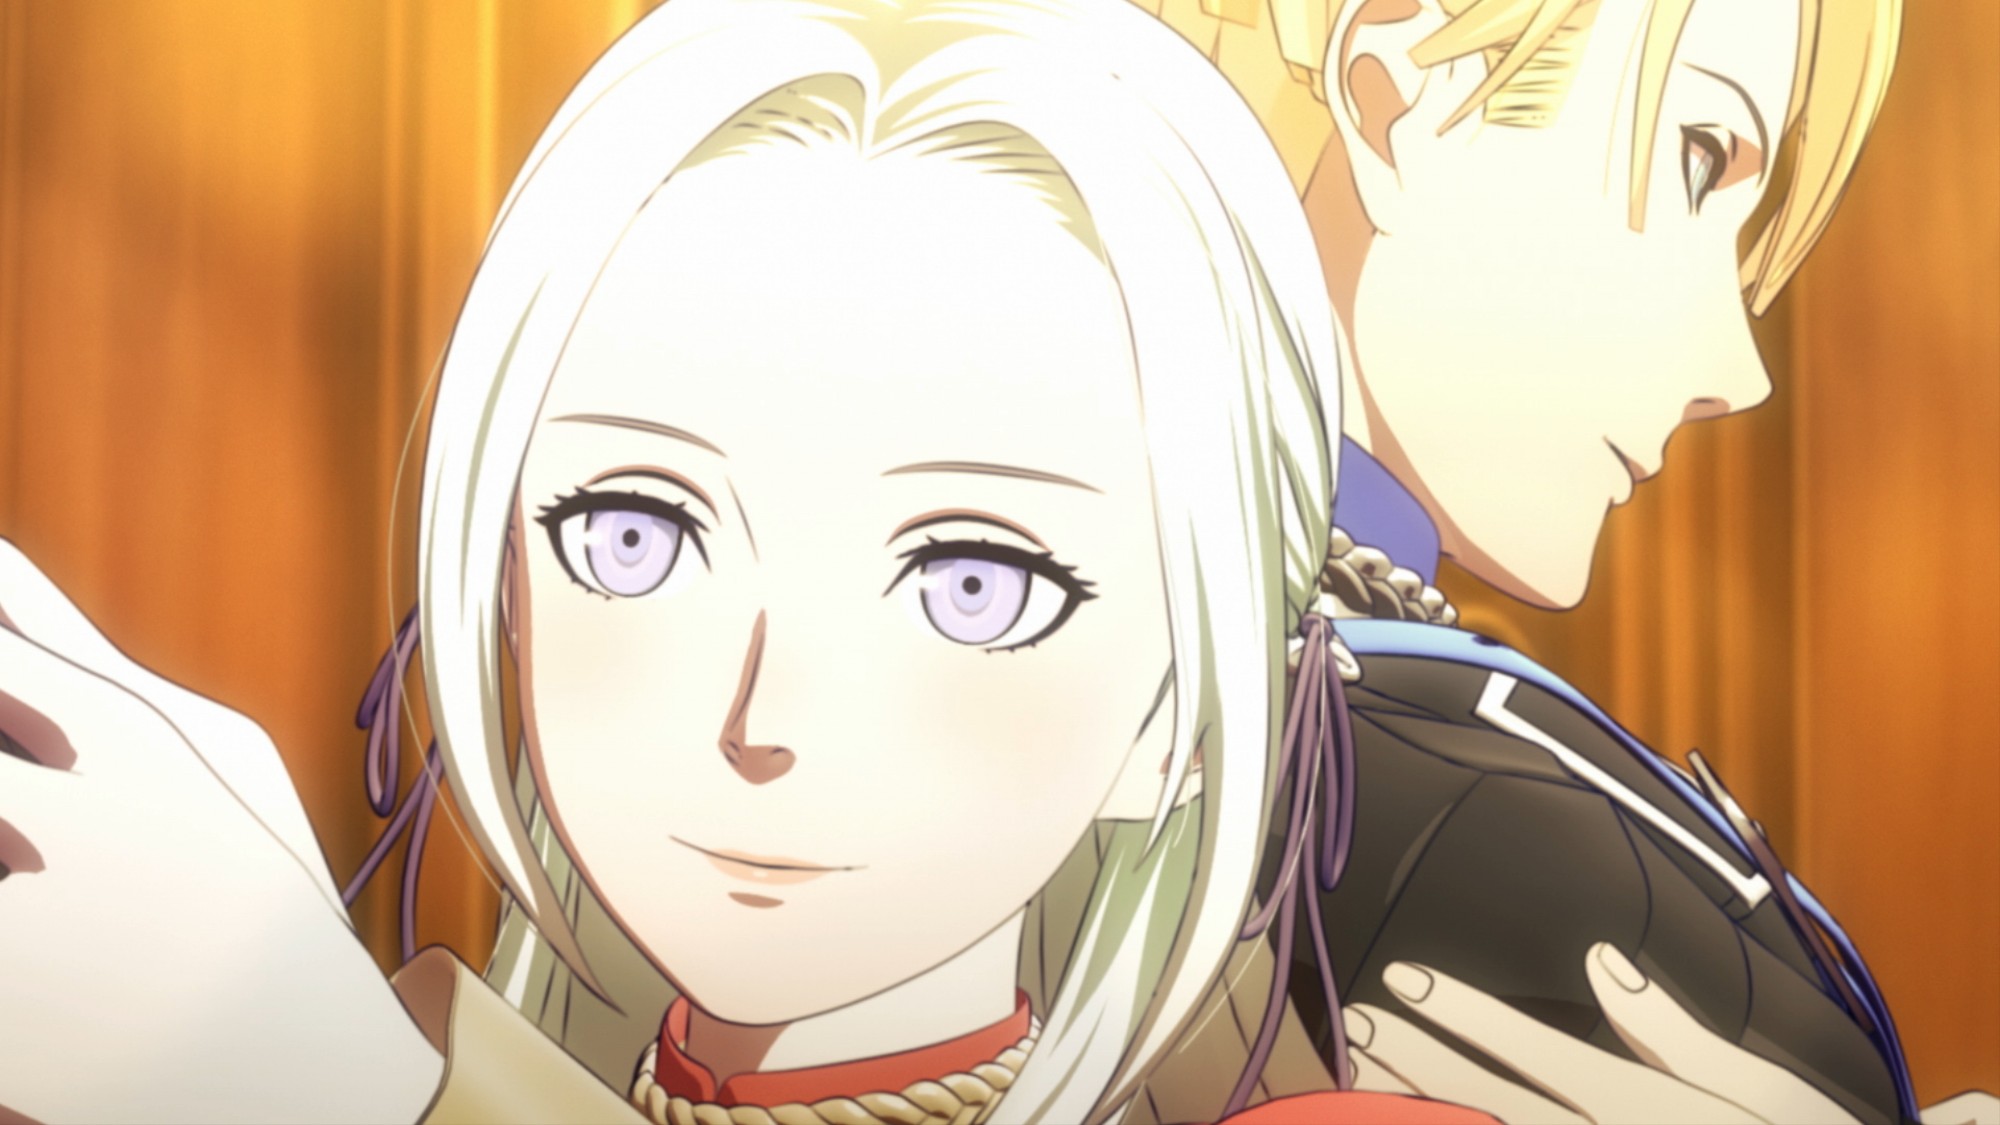 1565213582191-Switch_FEThreeHouses_E3_screen_16.png